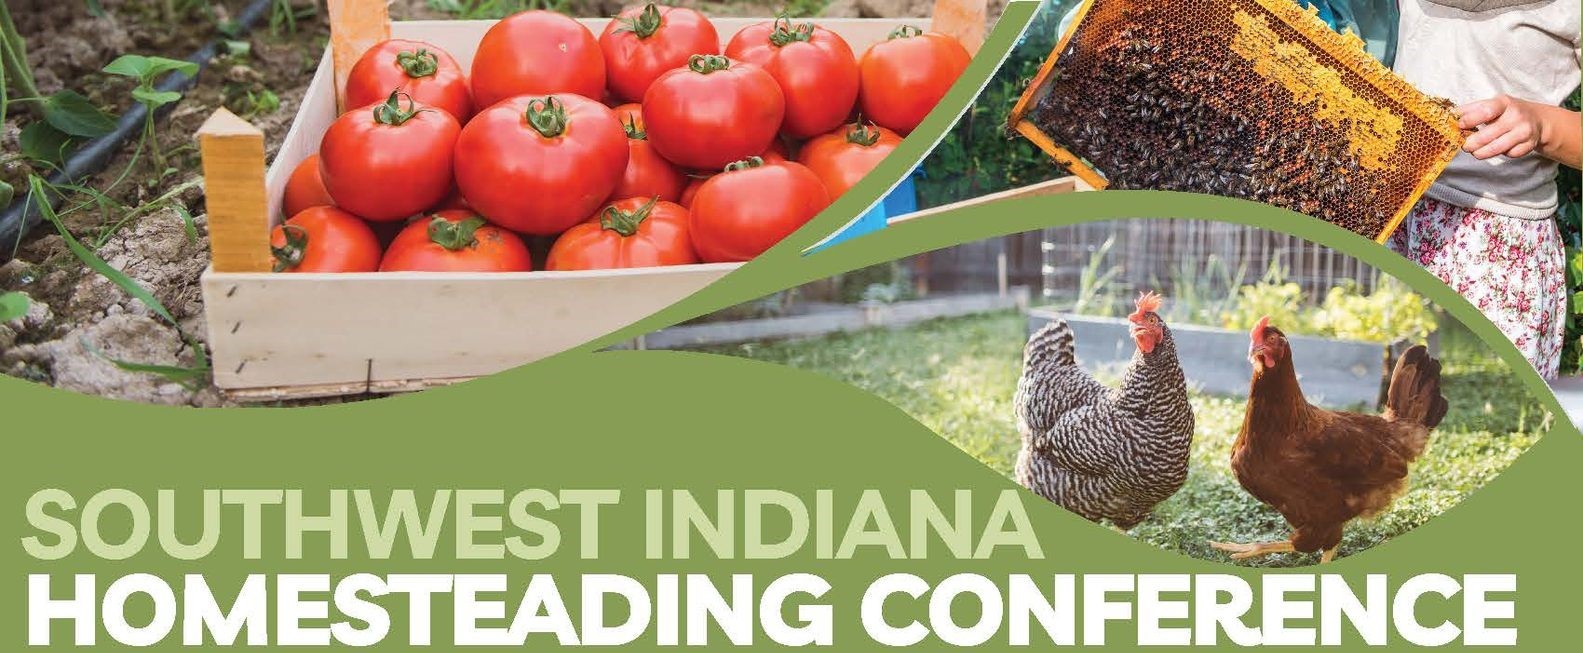 Title of conference with images of tomatoes, beekeeping and chickens in the background